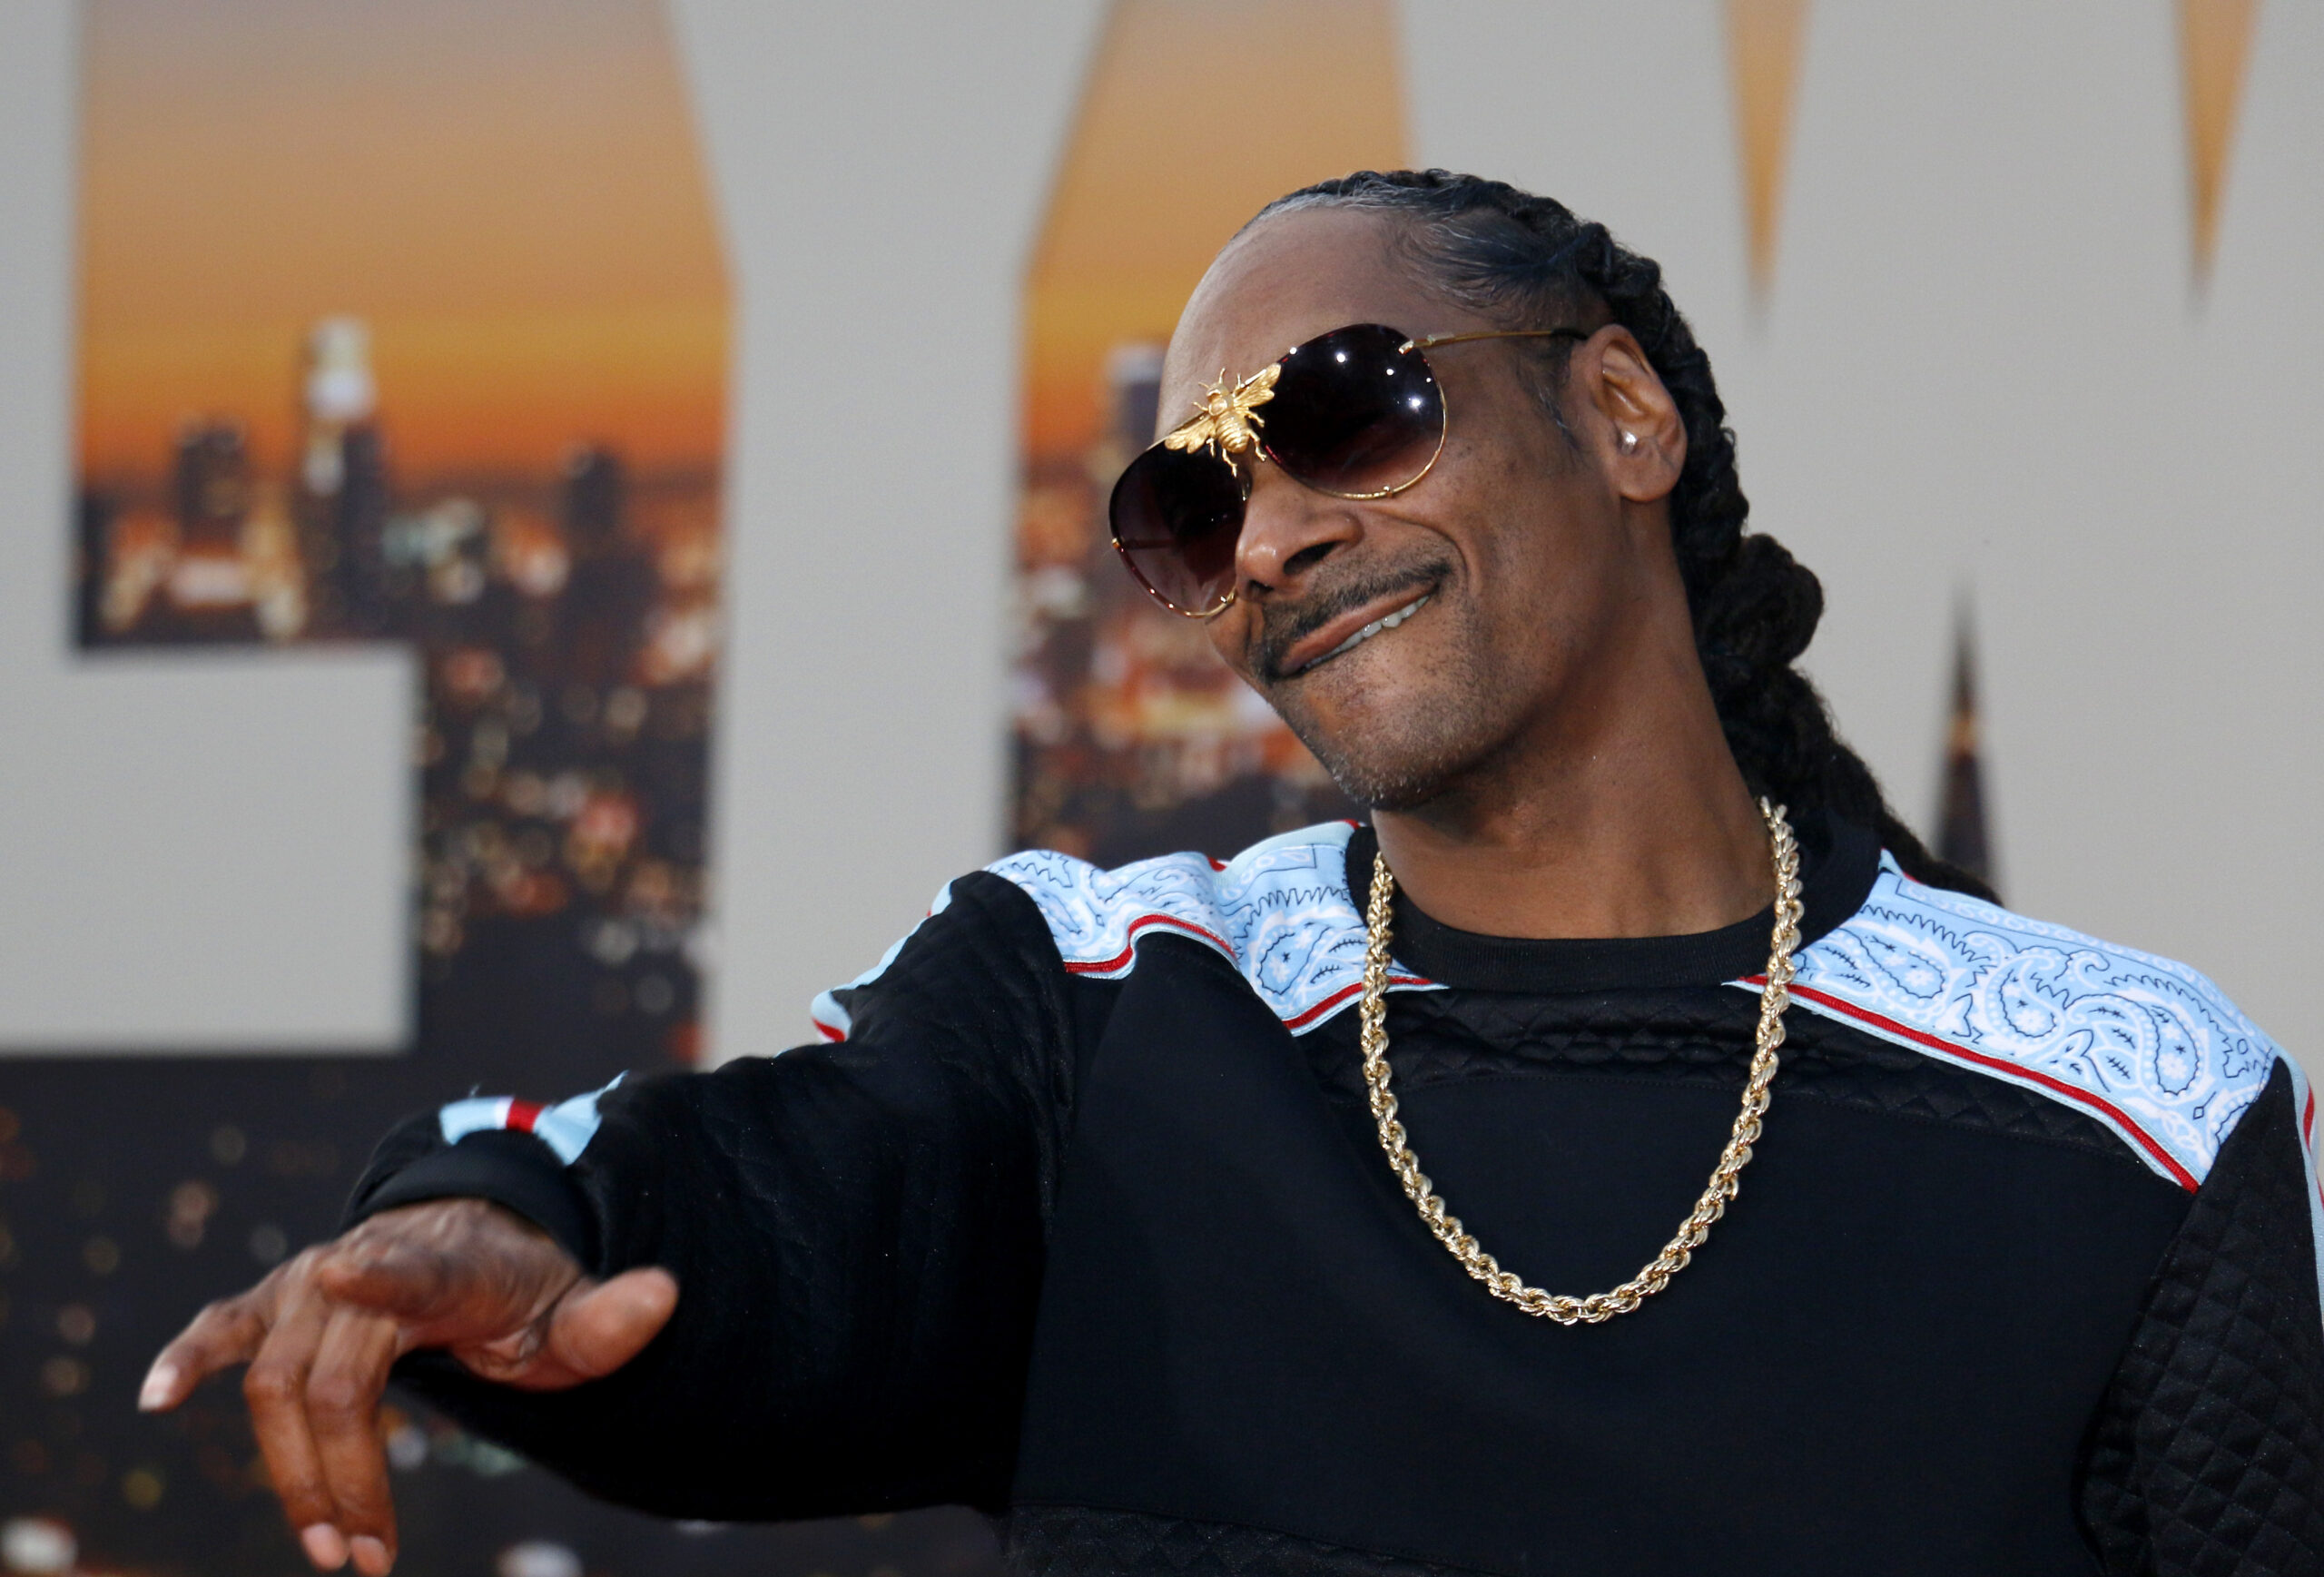 Universals Pictures announces a new Snoop Dogg biopic in works